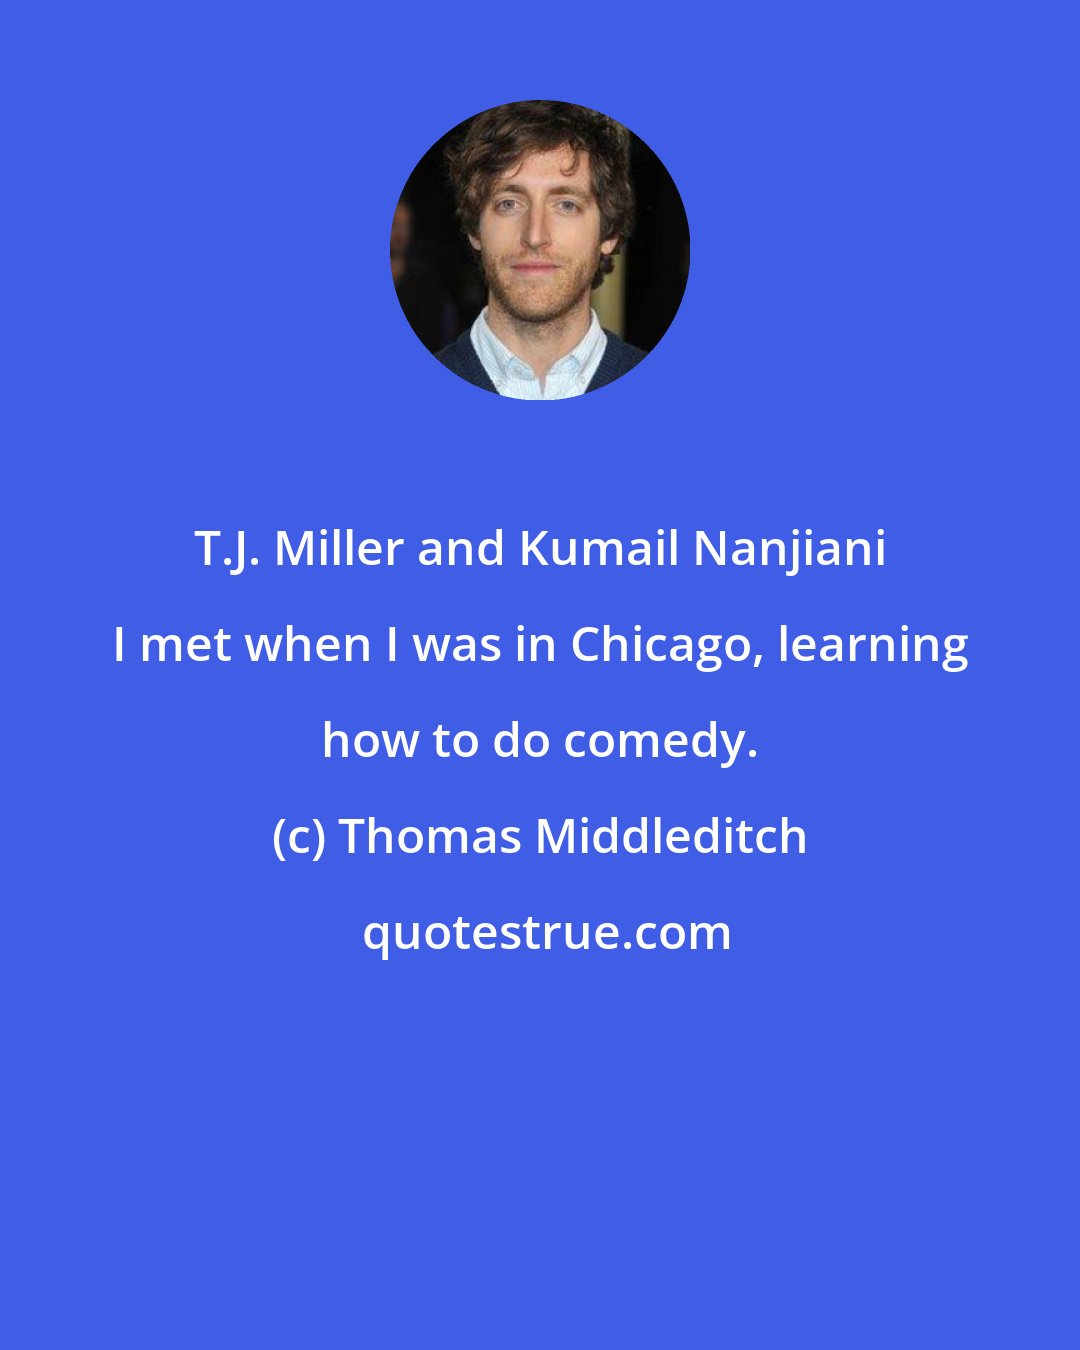 Thomas Middleditch: T.J. Miller and Kumail Nanjiani I met when I was in Chicago, learning how to do comedy.